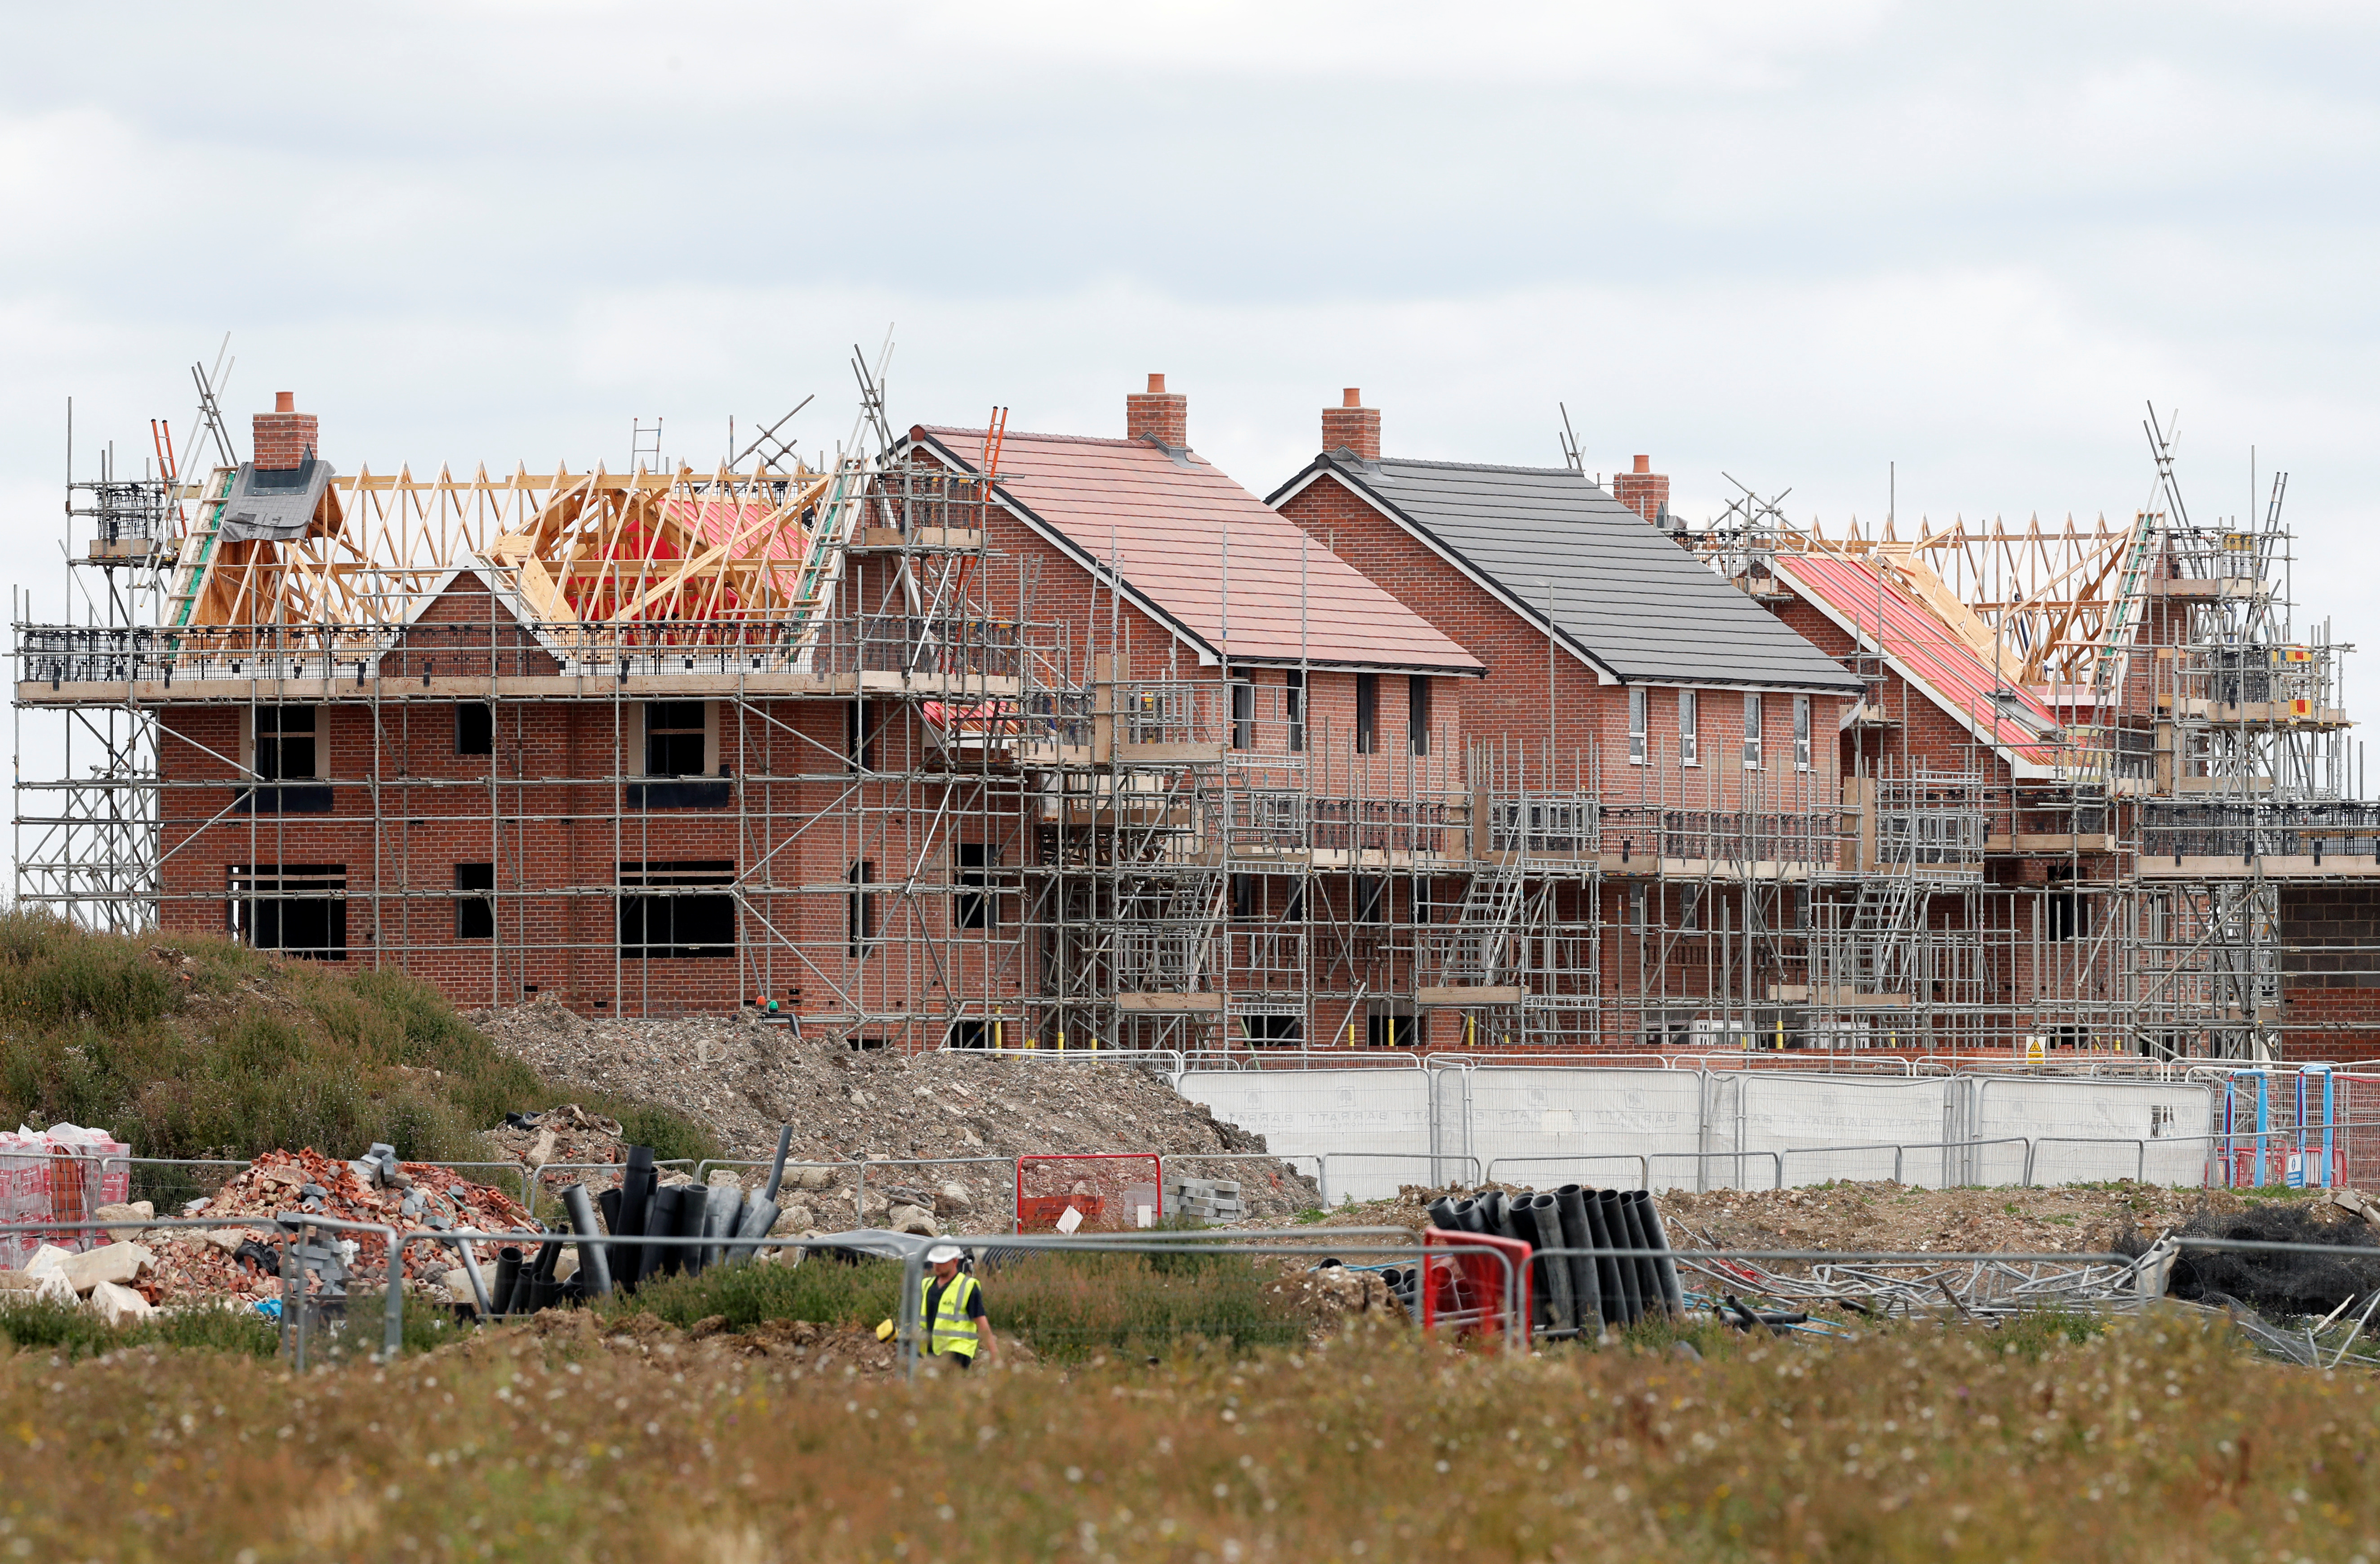 New houses under construction are pictured in Aylesbury